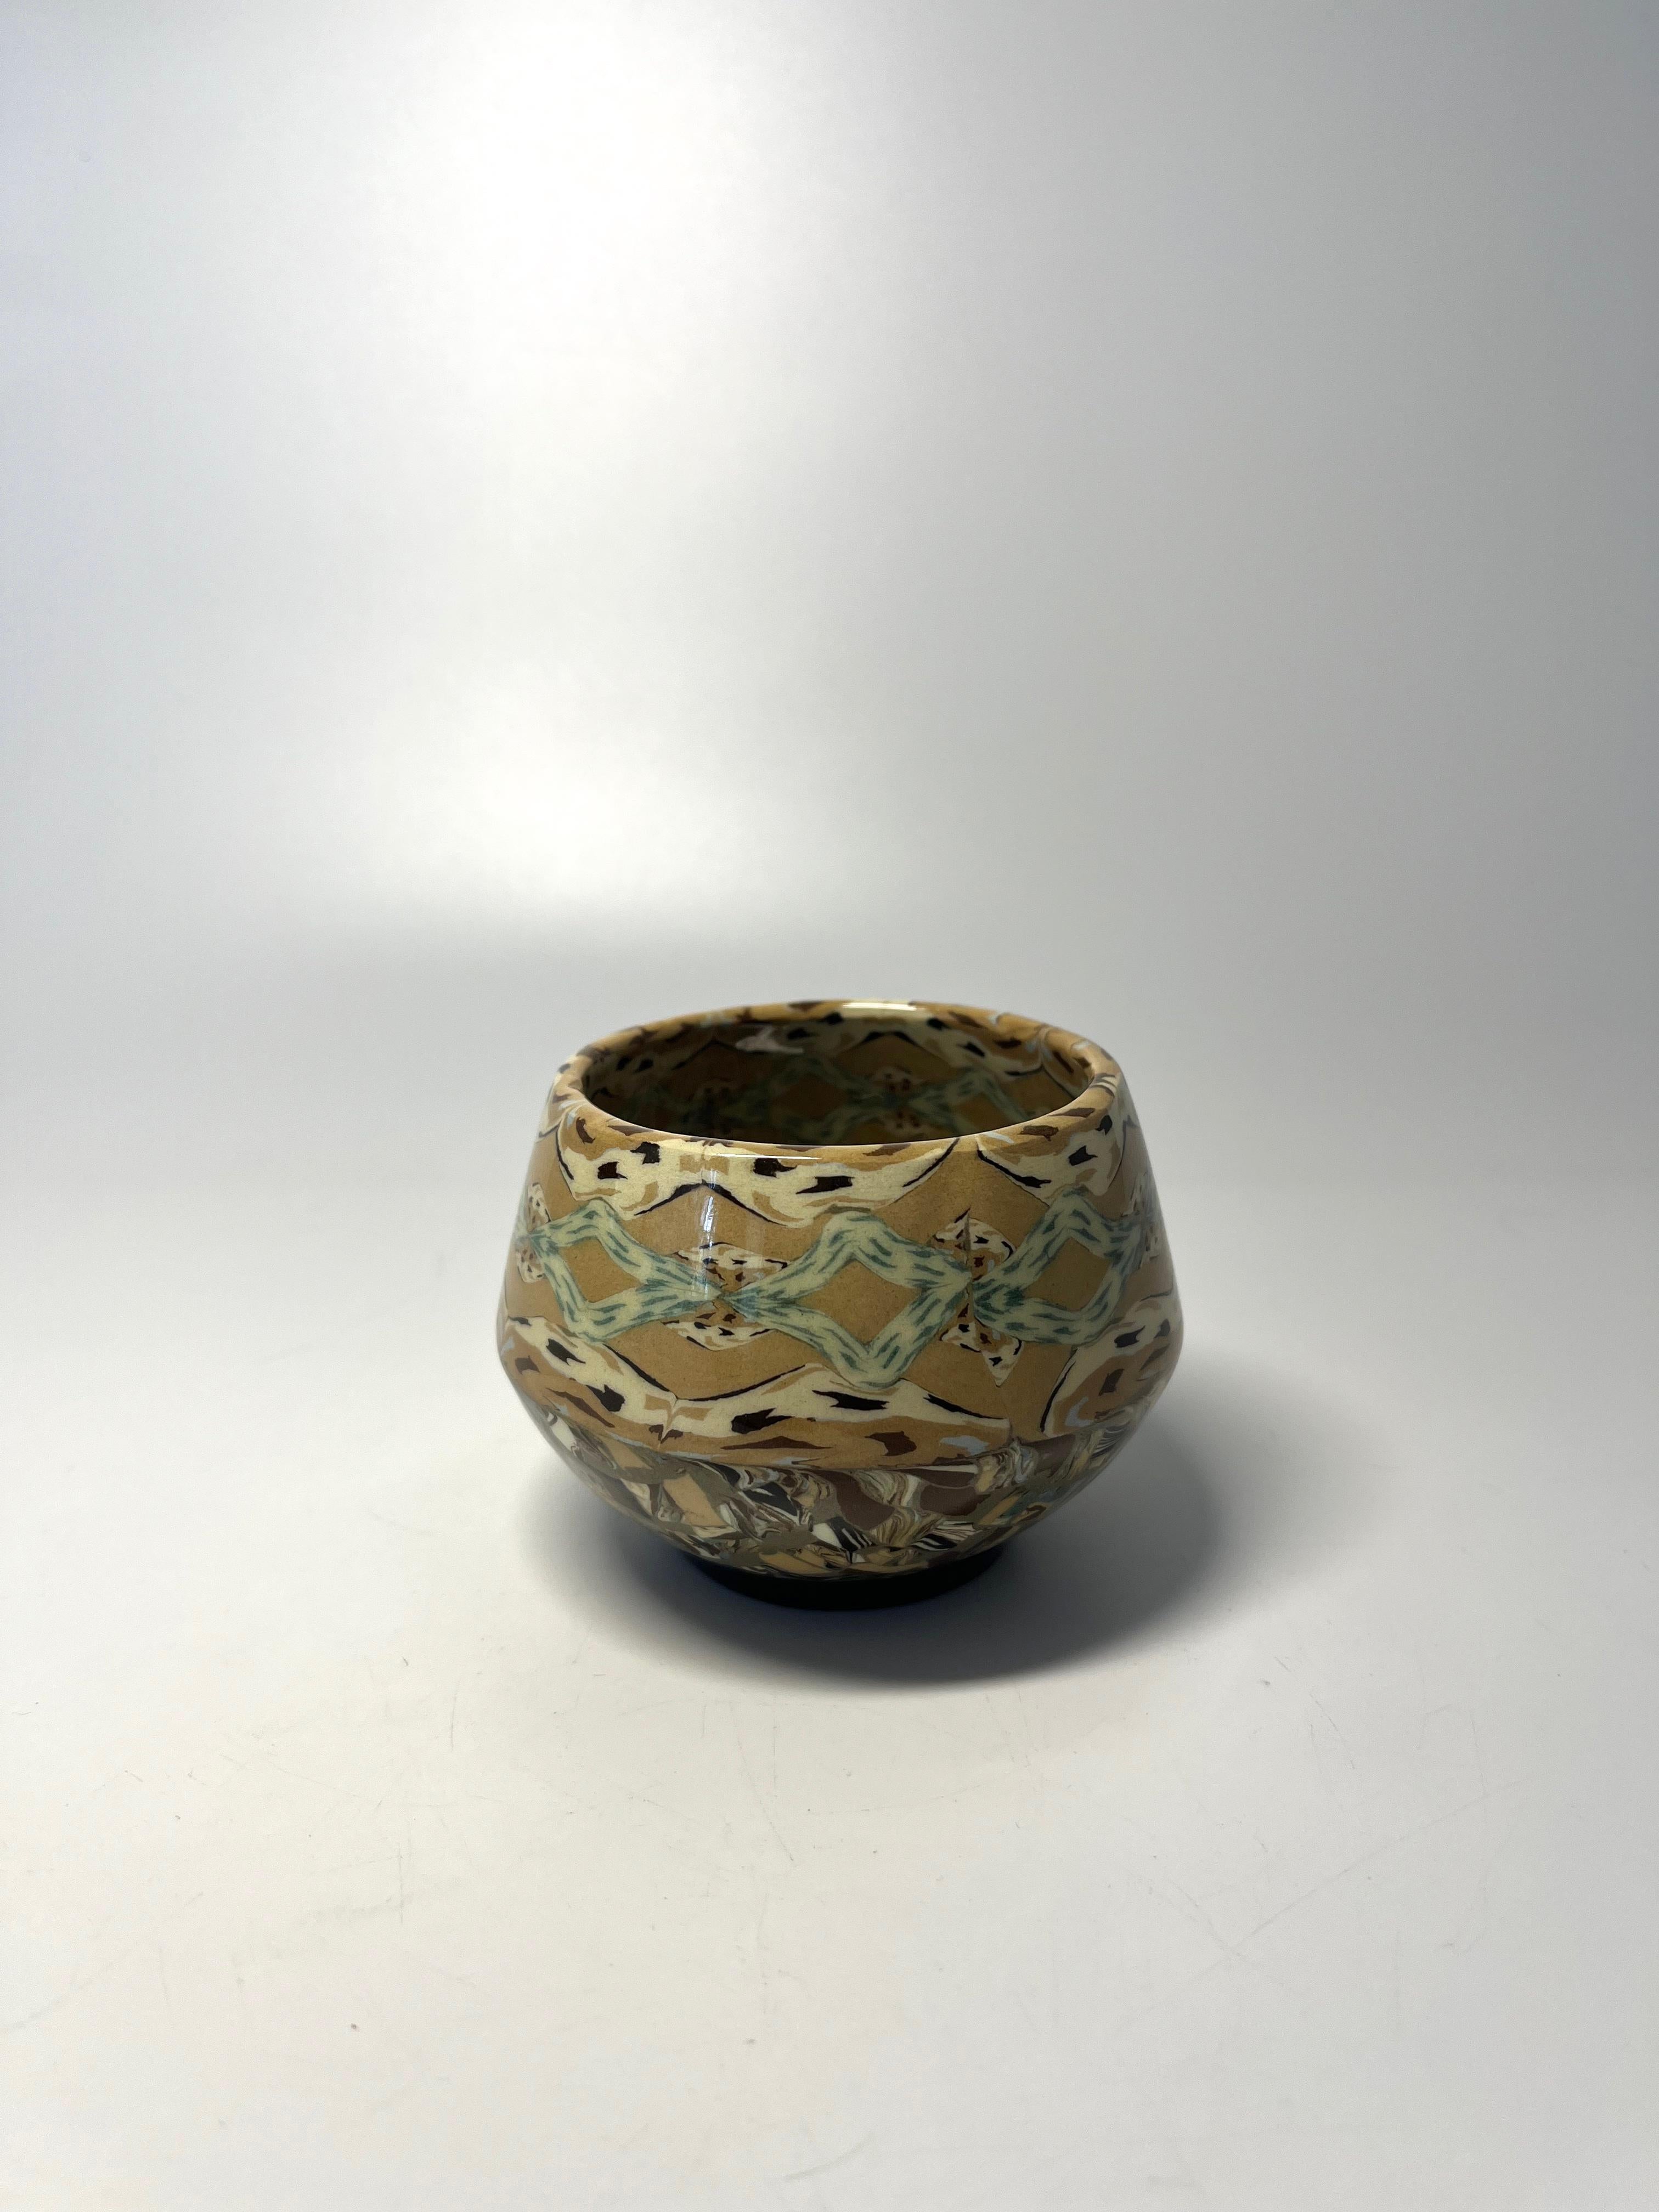 A sweet petit ceramic pot from Jean Gerbino for Vallauris, France.
Beautiful and delicate earth tones mosaic
Circa 1960's
Signed Gerbino  to base
Height 2.5 inch, Diameter 3.5 inch, 
In excellent condition. 
Wear consistent with age and use